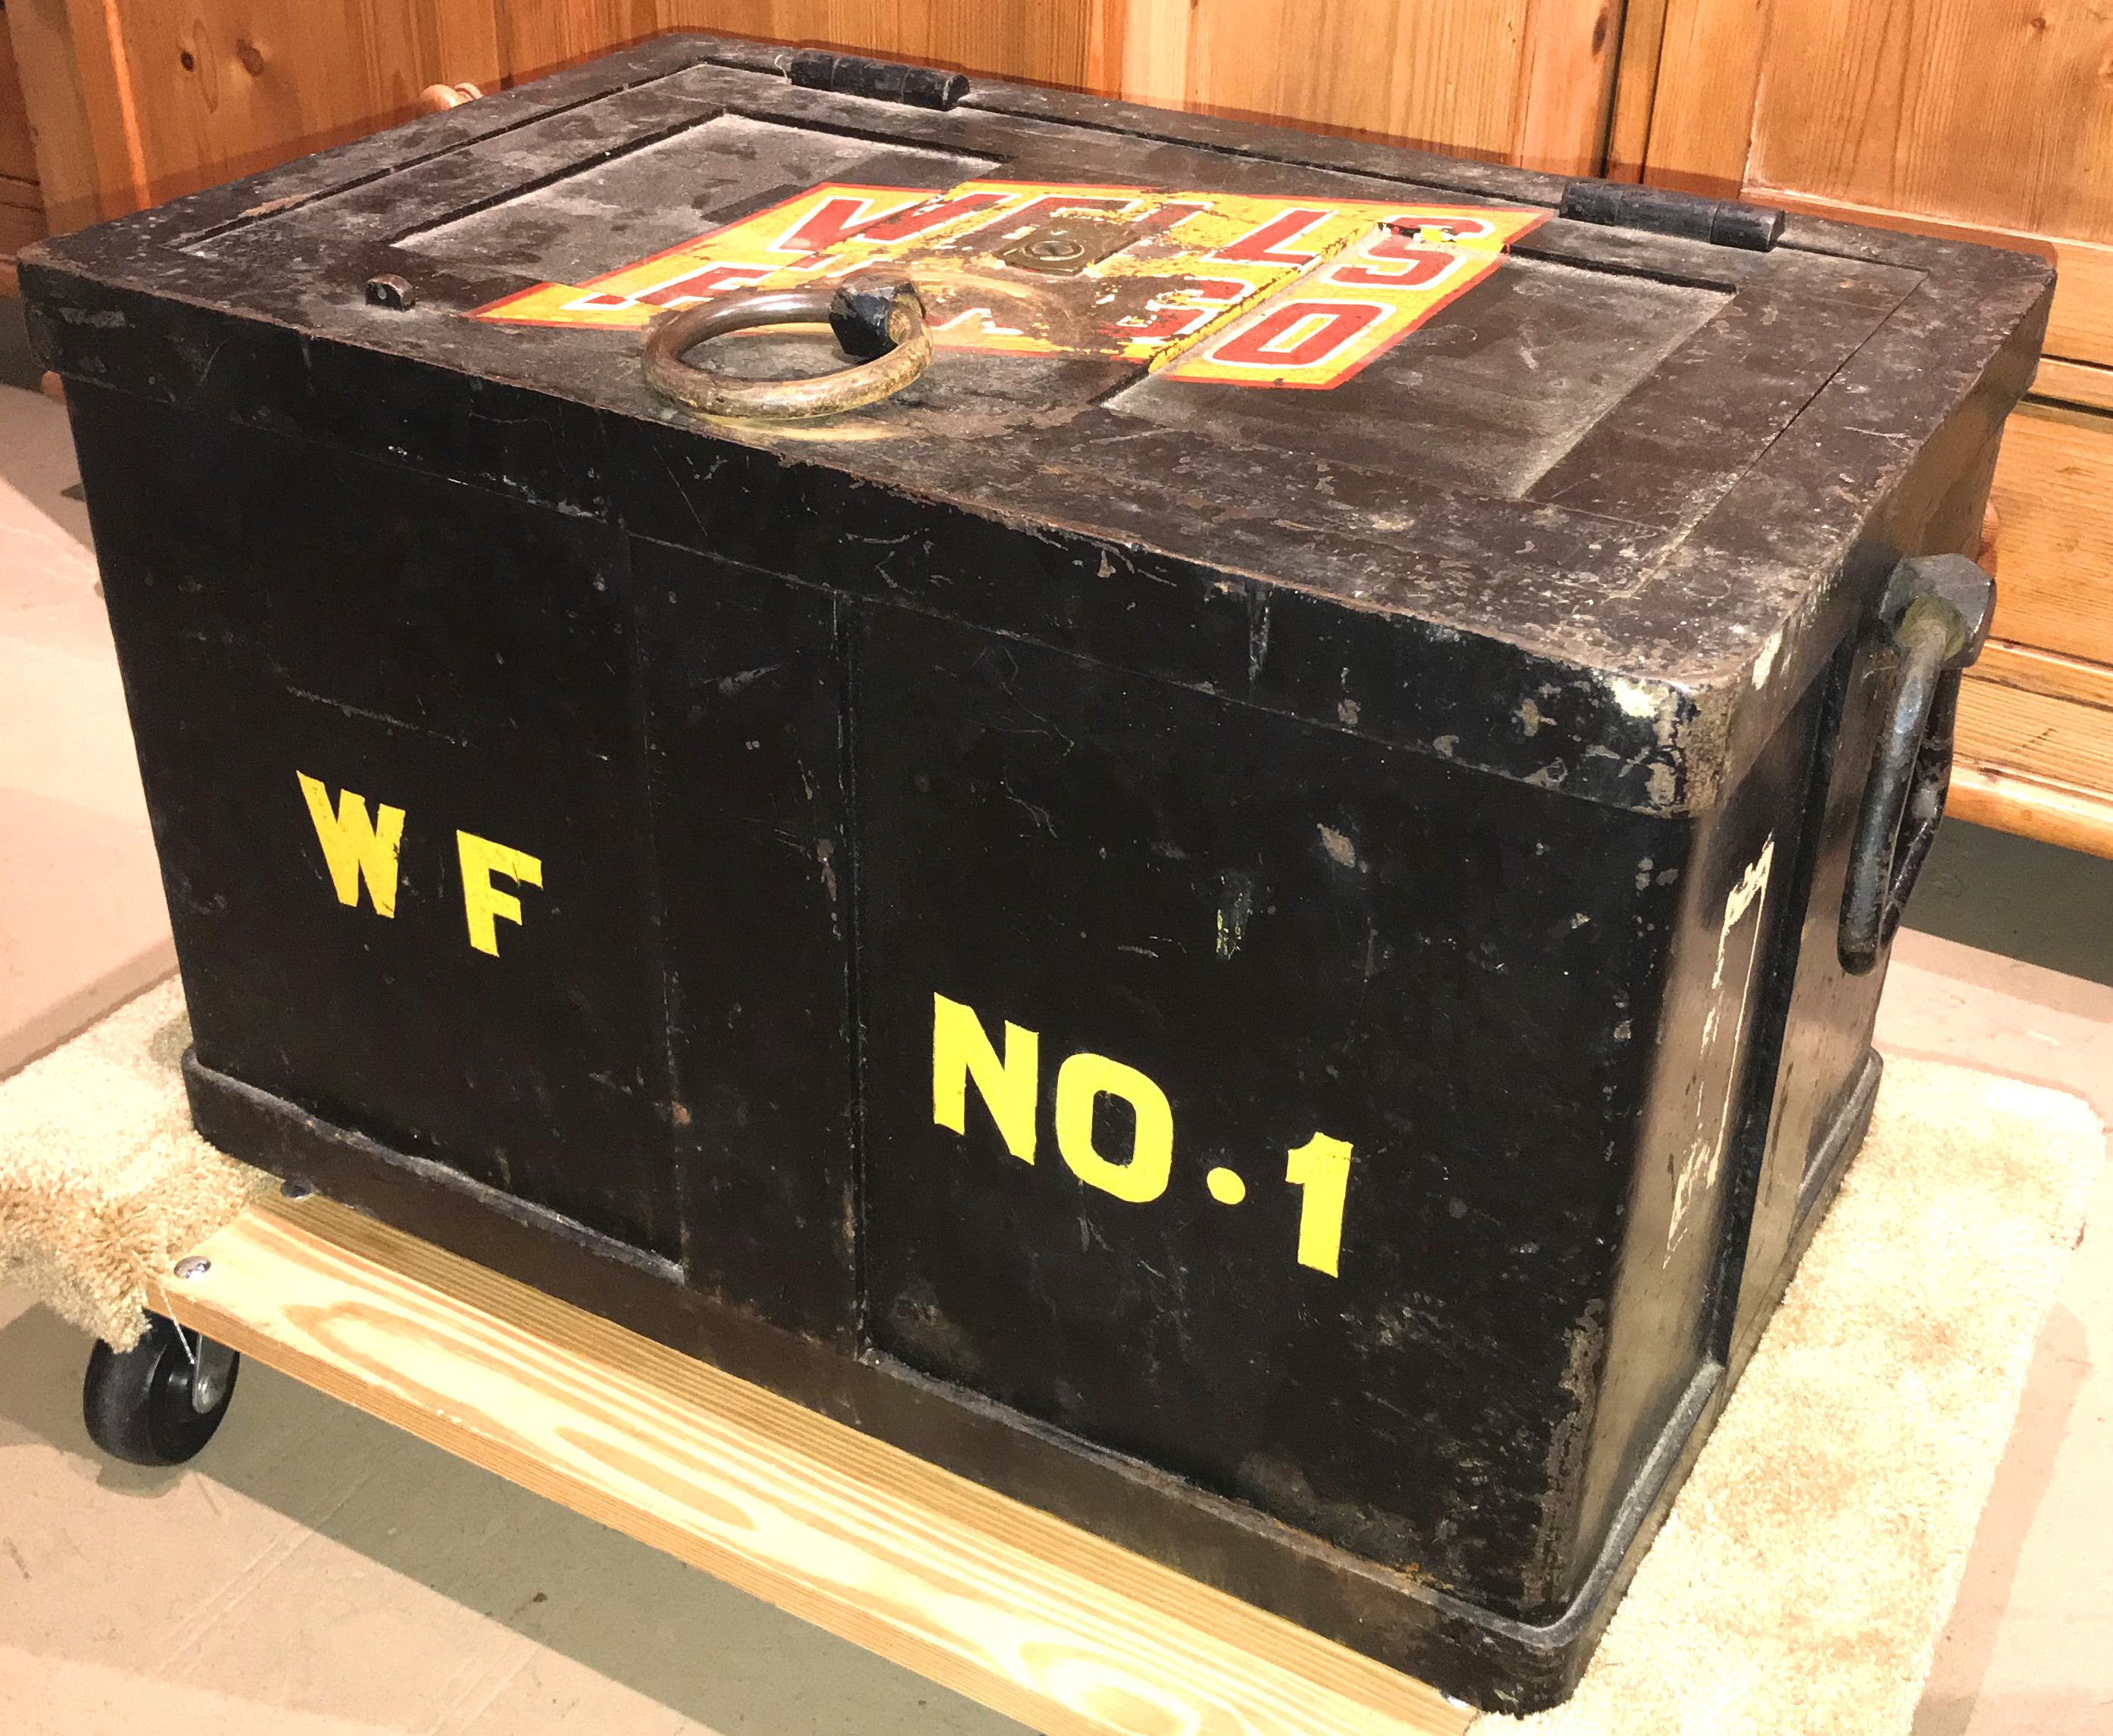 A solid iron railroad strong box,  with top door and side handles intact, repainted at some point in time with black surface, including paint decoration for Wells Fargo in a yellow and red logo on its top, as well as WF No.1 in yellow on the front